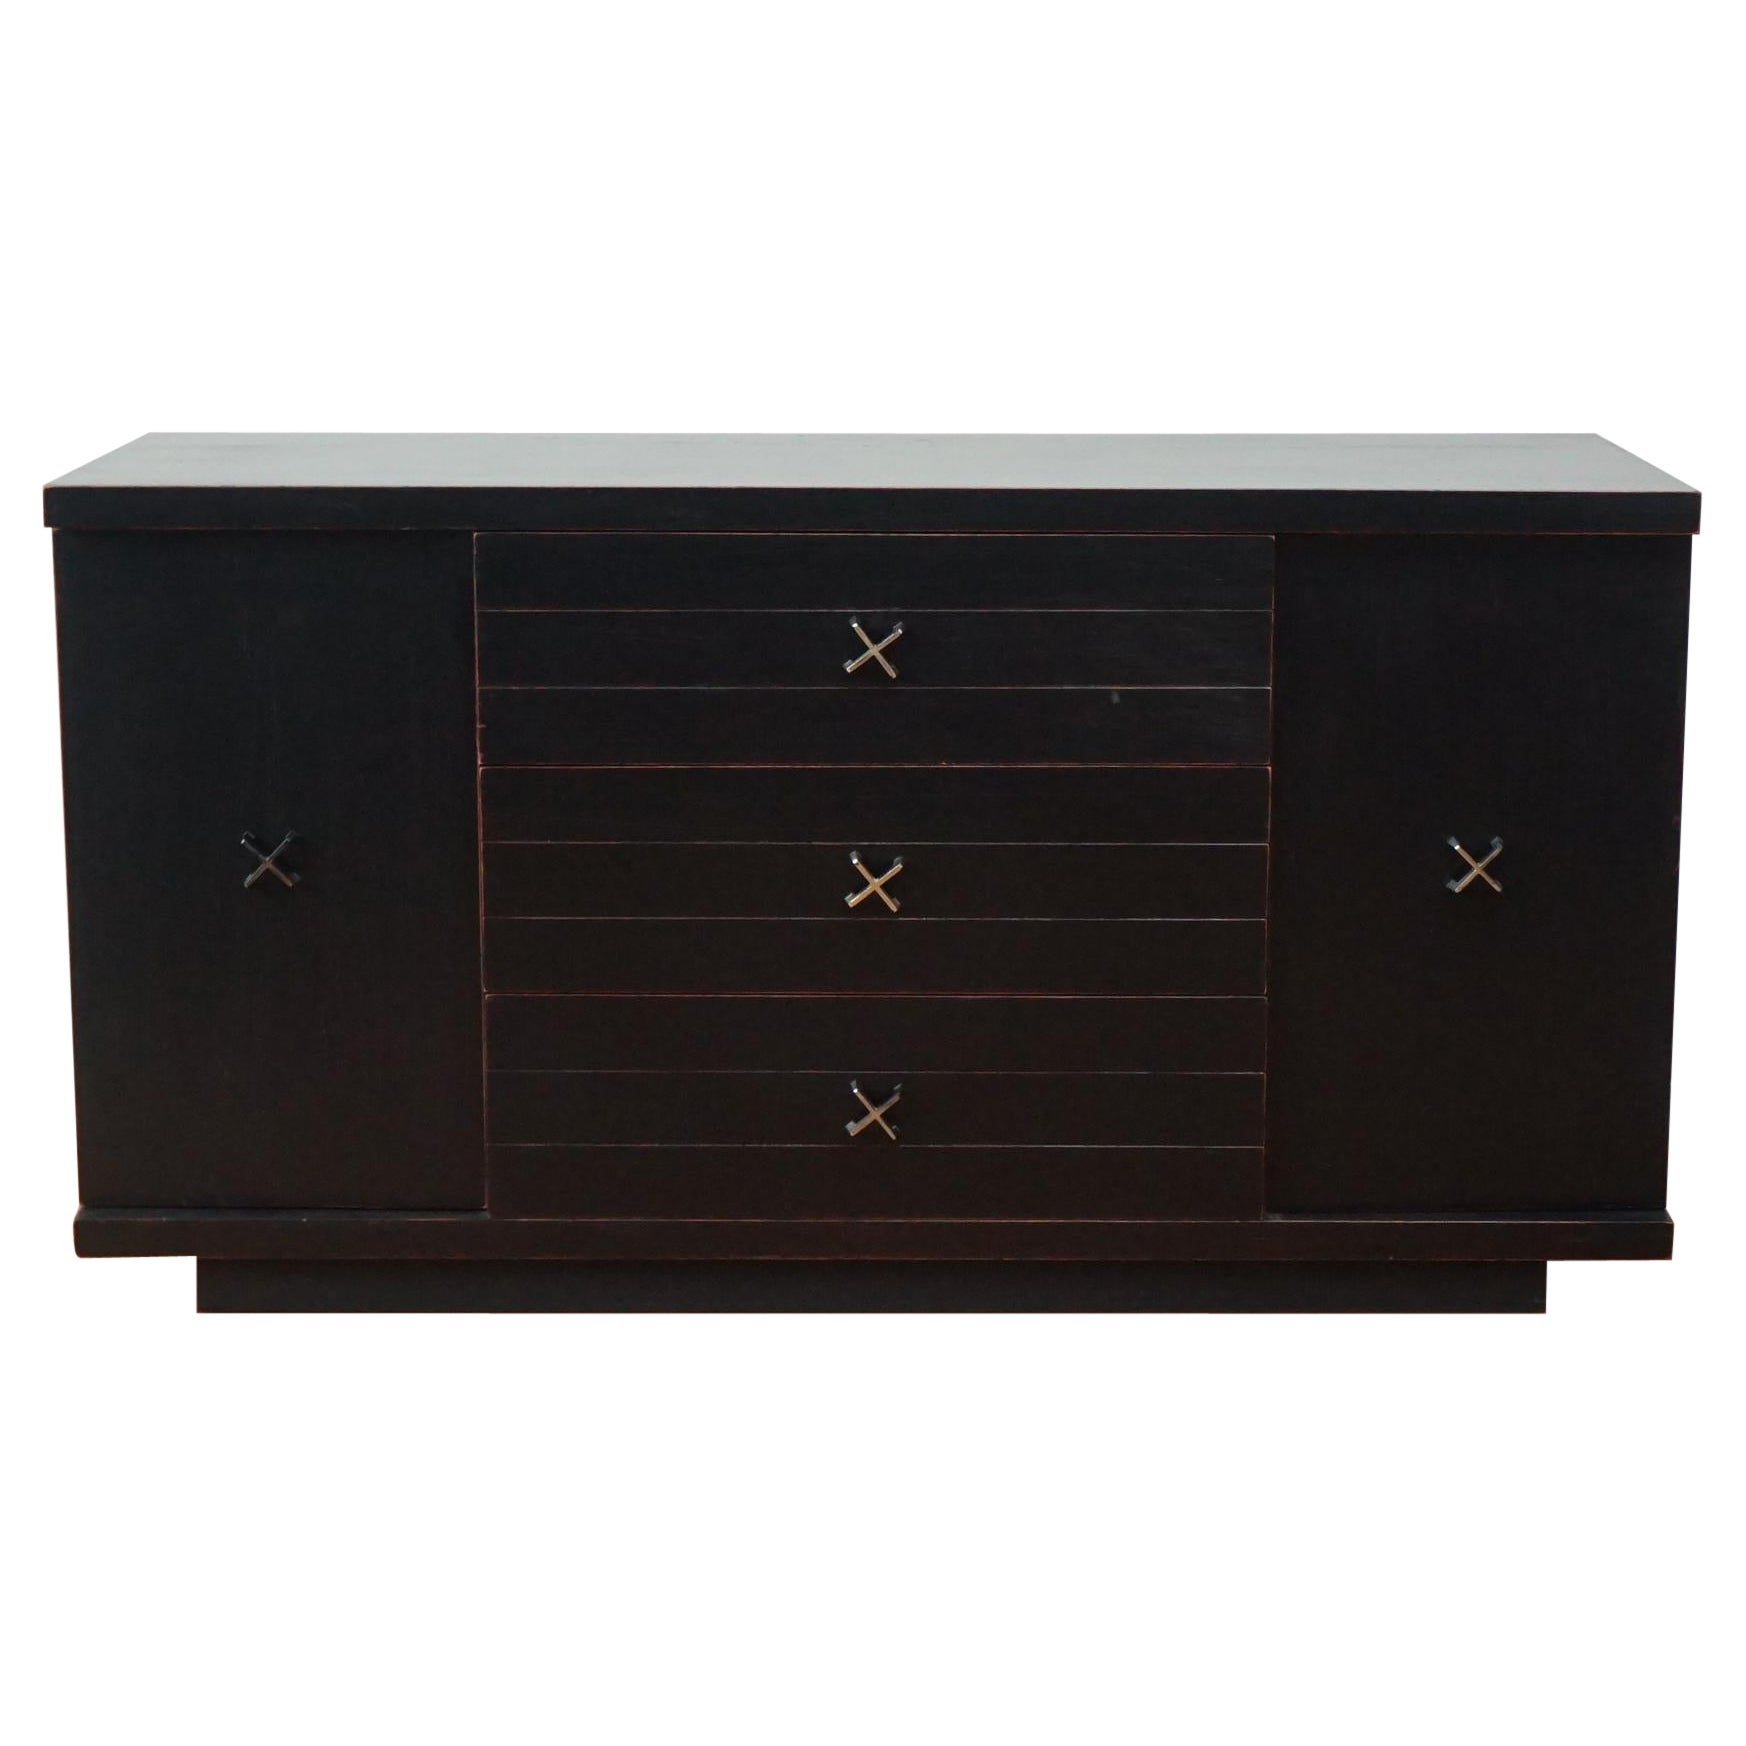 Mid-Century Modern Sideboard in Distressed Matte Black Finish For Sale